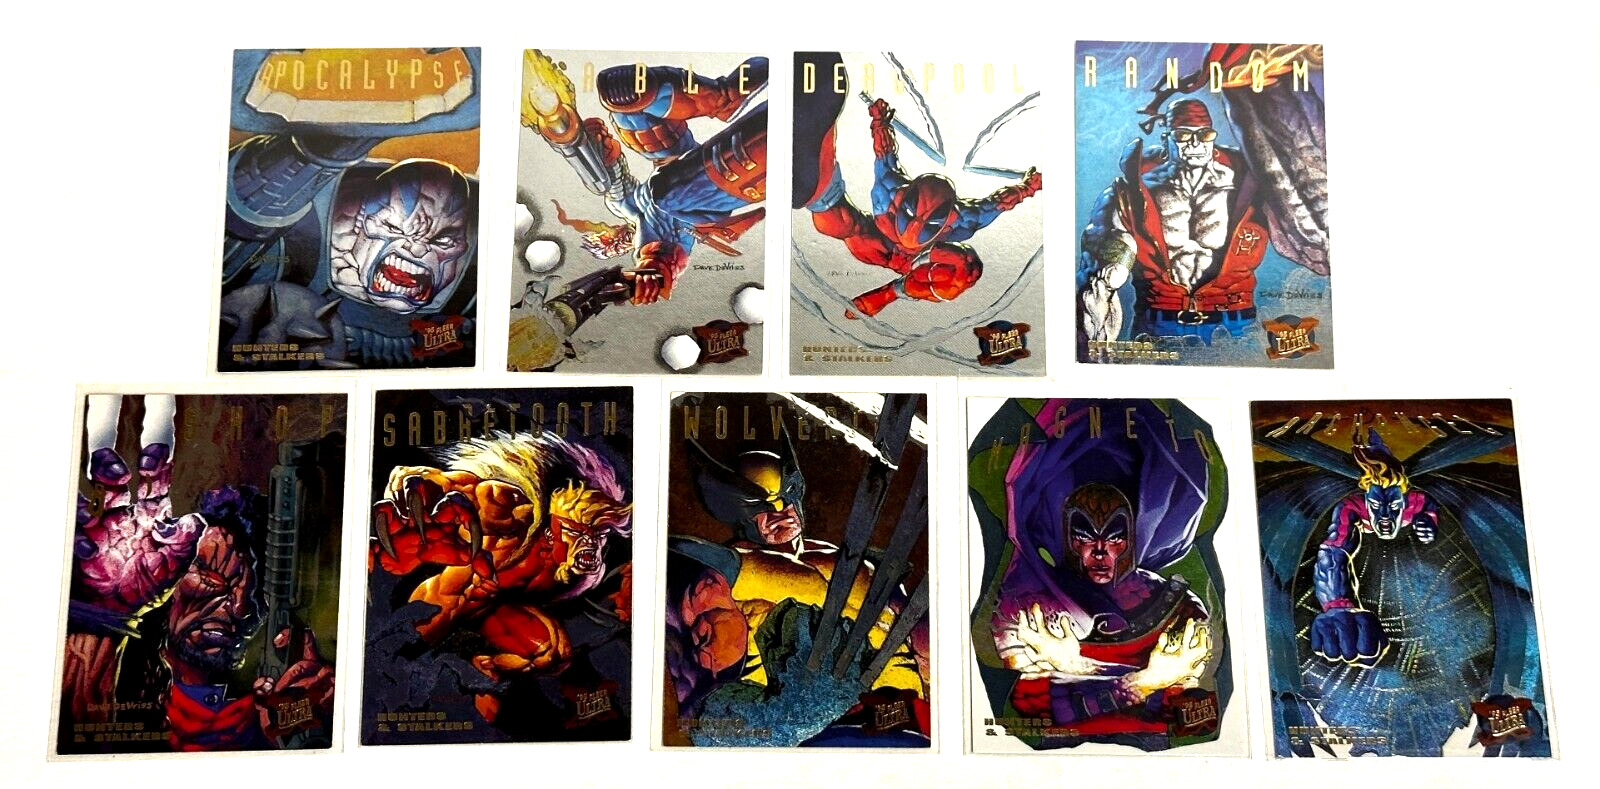 1995 X-Men Hunters and Stalkers Complete Limited Edition Trading Card Set 1-9